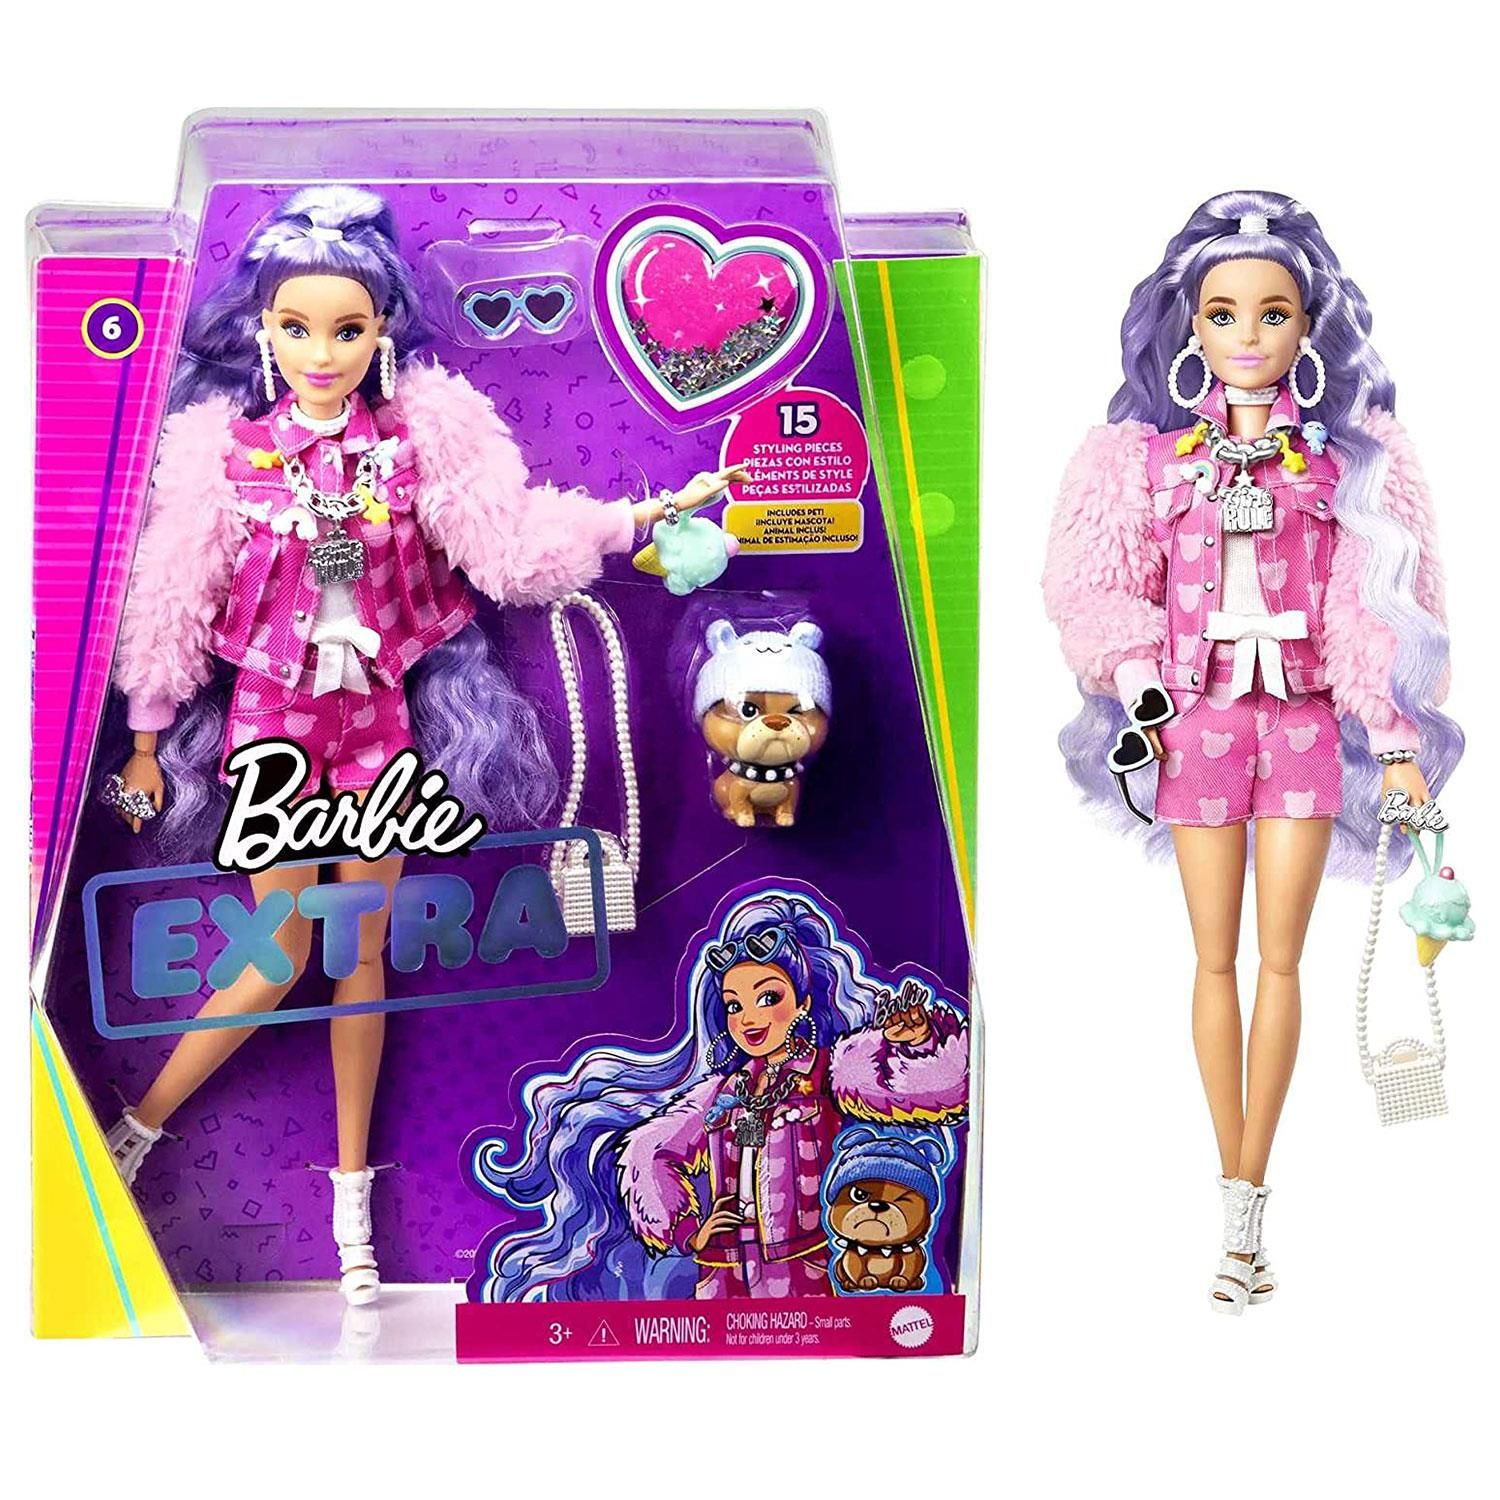 The Barbie Extra dolls blend bright colors with trendy fashions, making big statements! Each Barbie doll rocks a unique playful style, and each doll toy comes with an adorable pet, full of personality!

Barbie Extra dolls bring the 